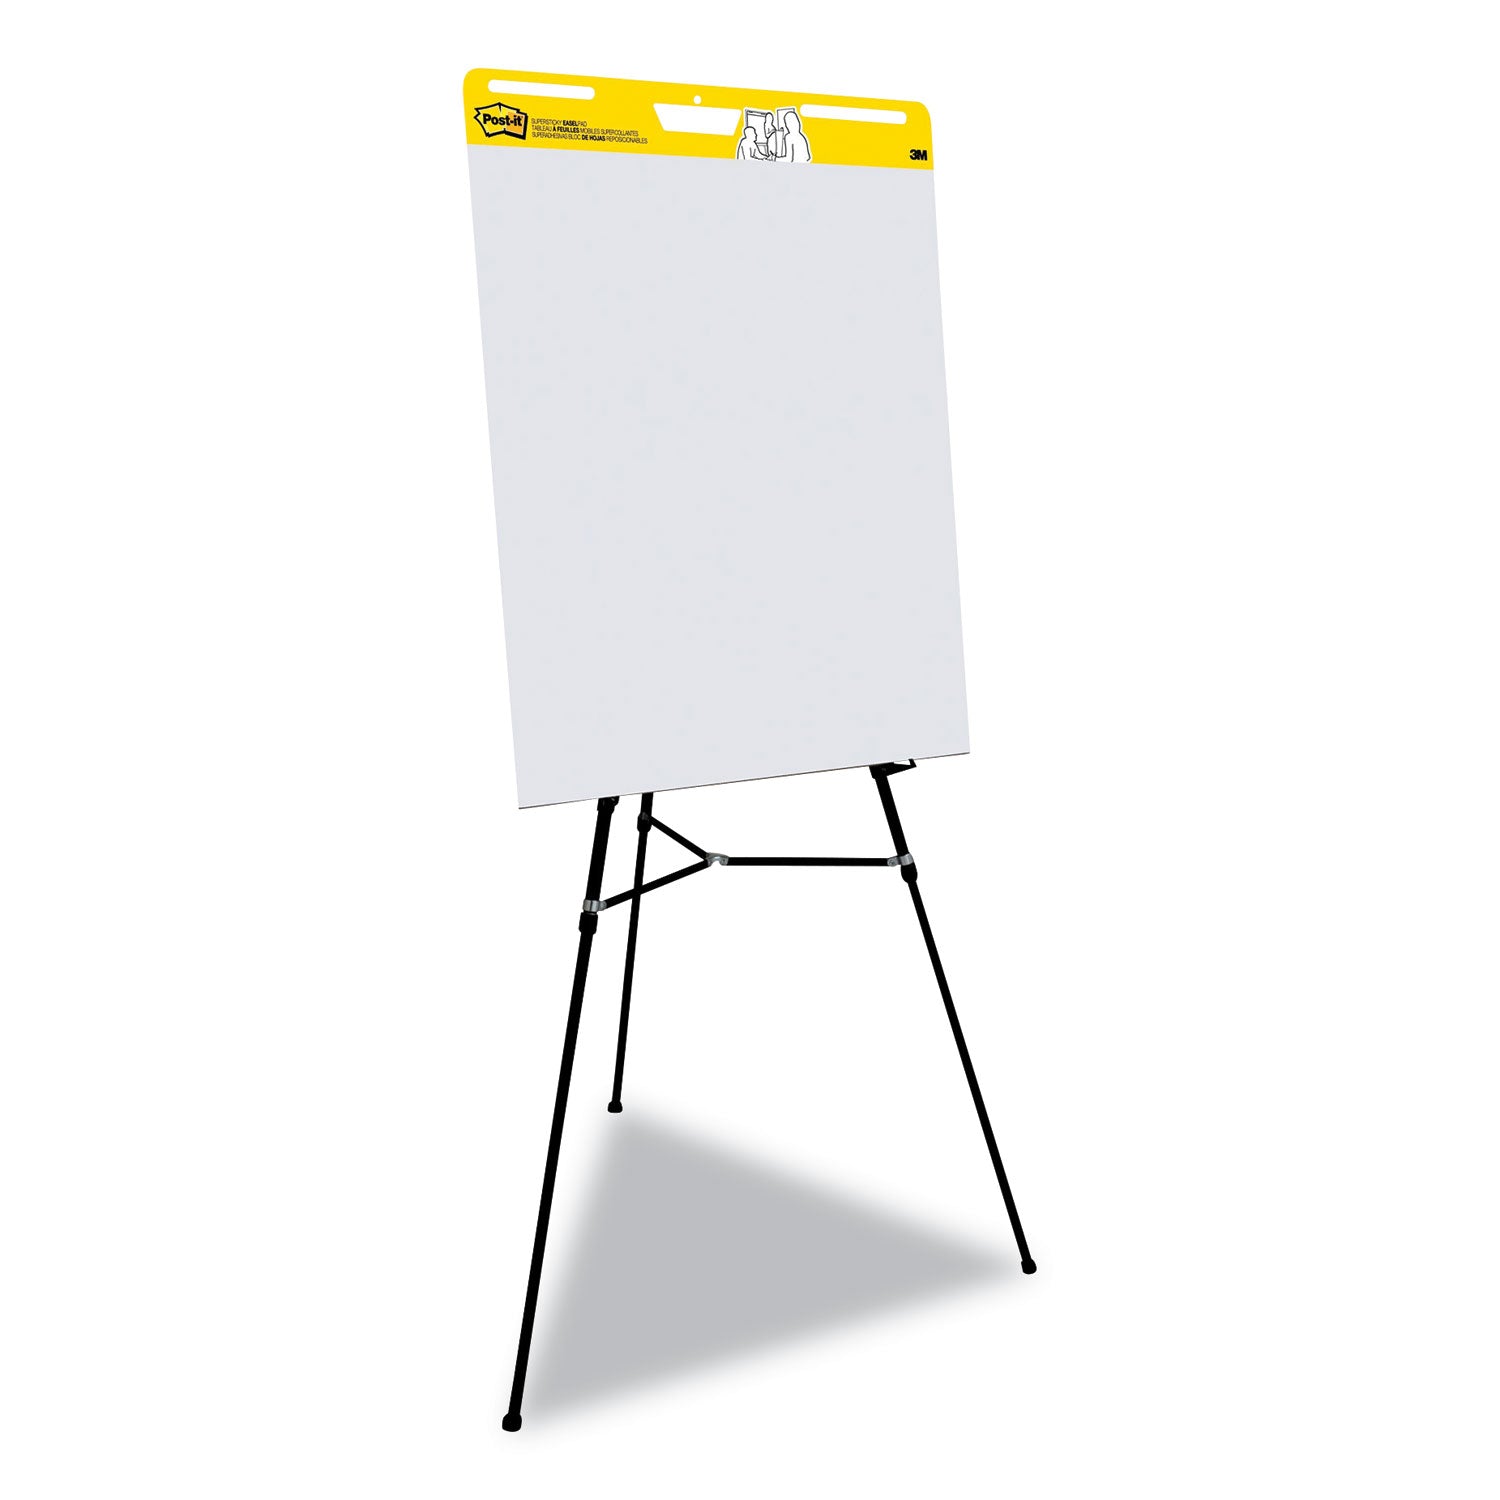 vertical-orientation-self-stick-easel-pads-quadrille-rule-1-sq-in-25-x-30-white-30-sheets-6-pack_mmm560vad6pk - 6